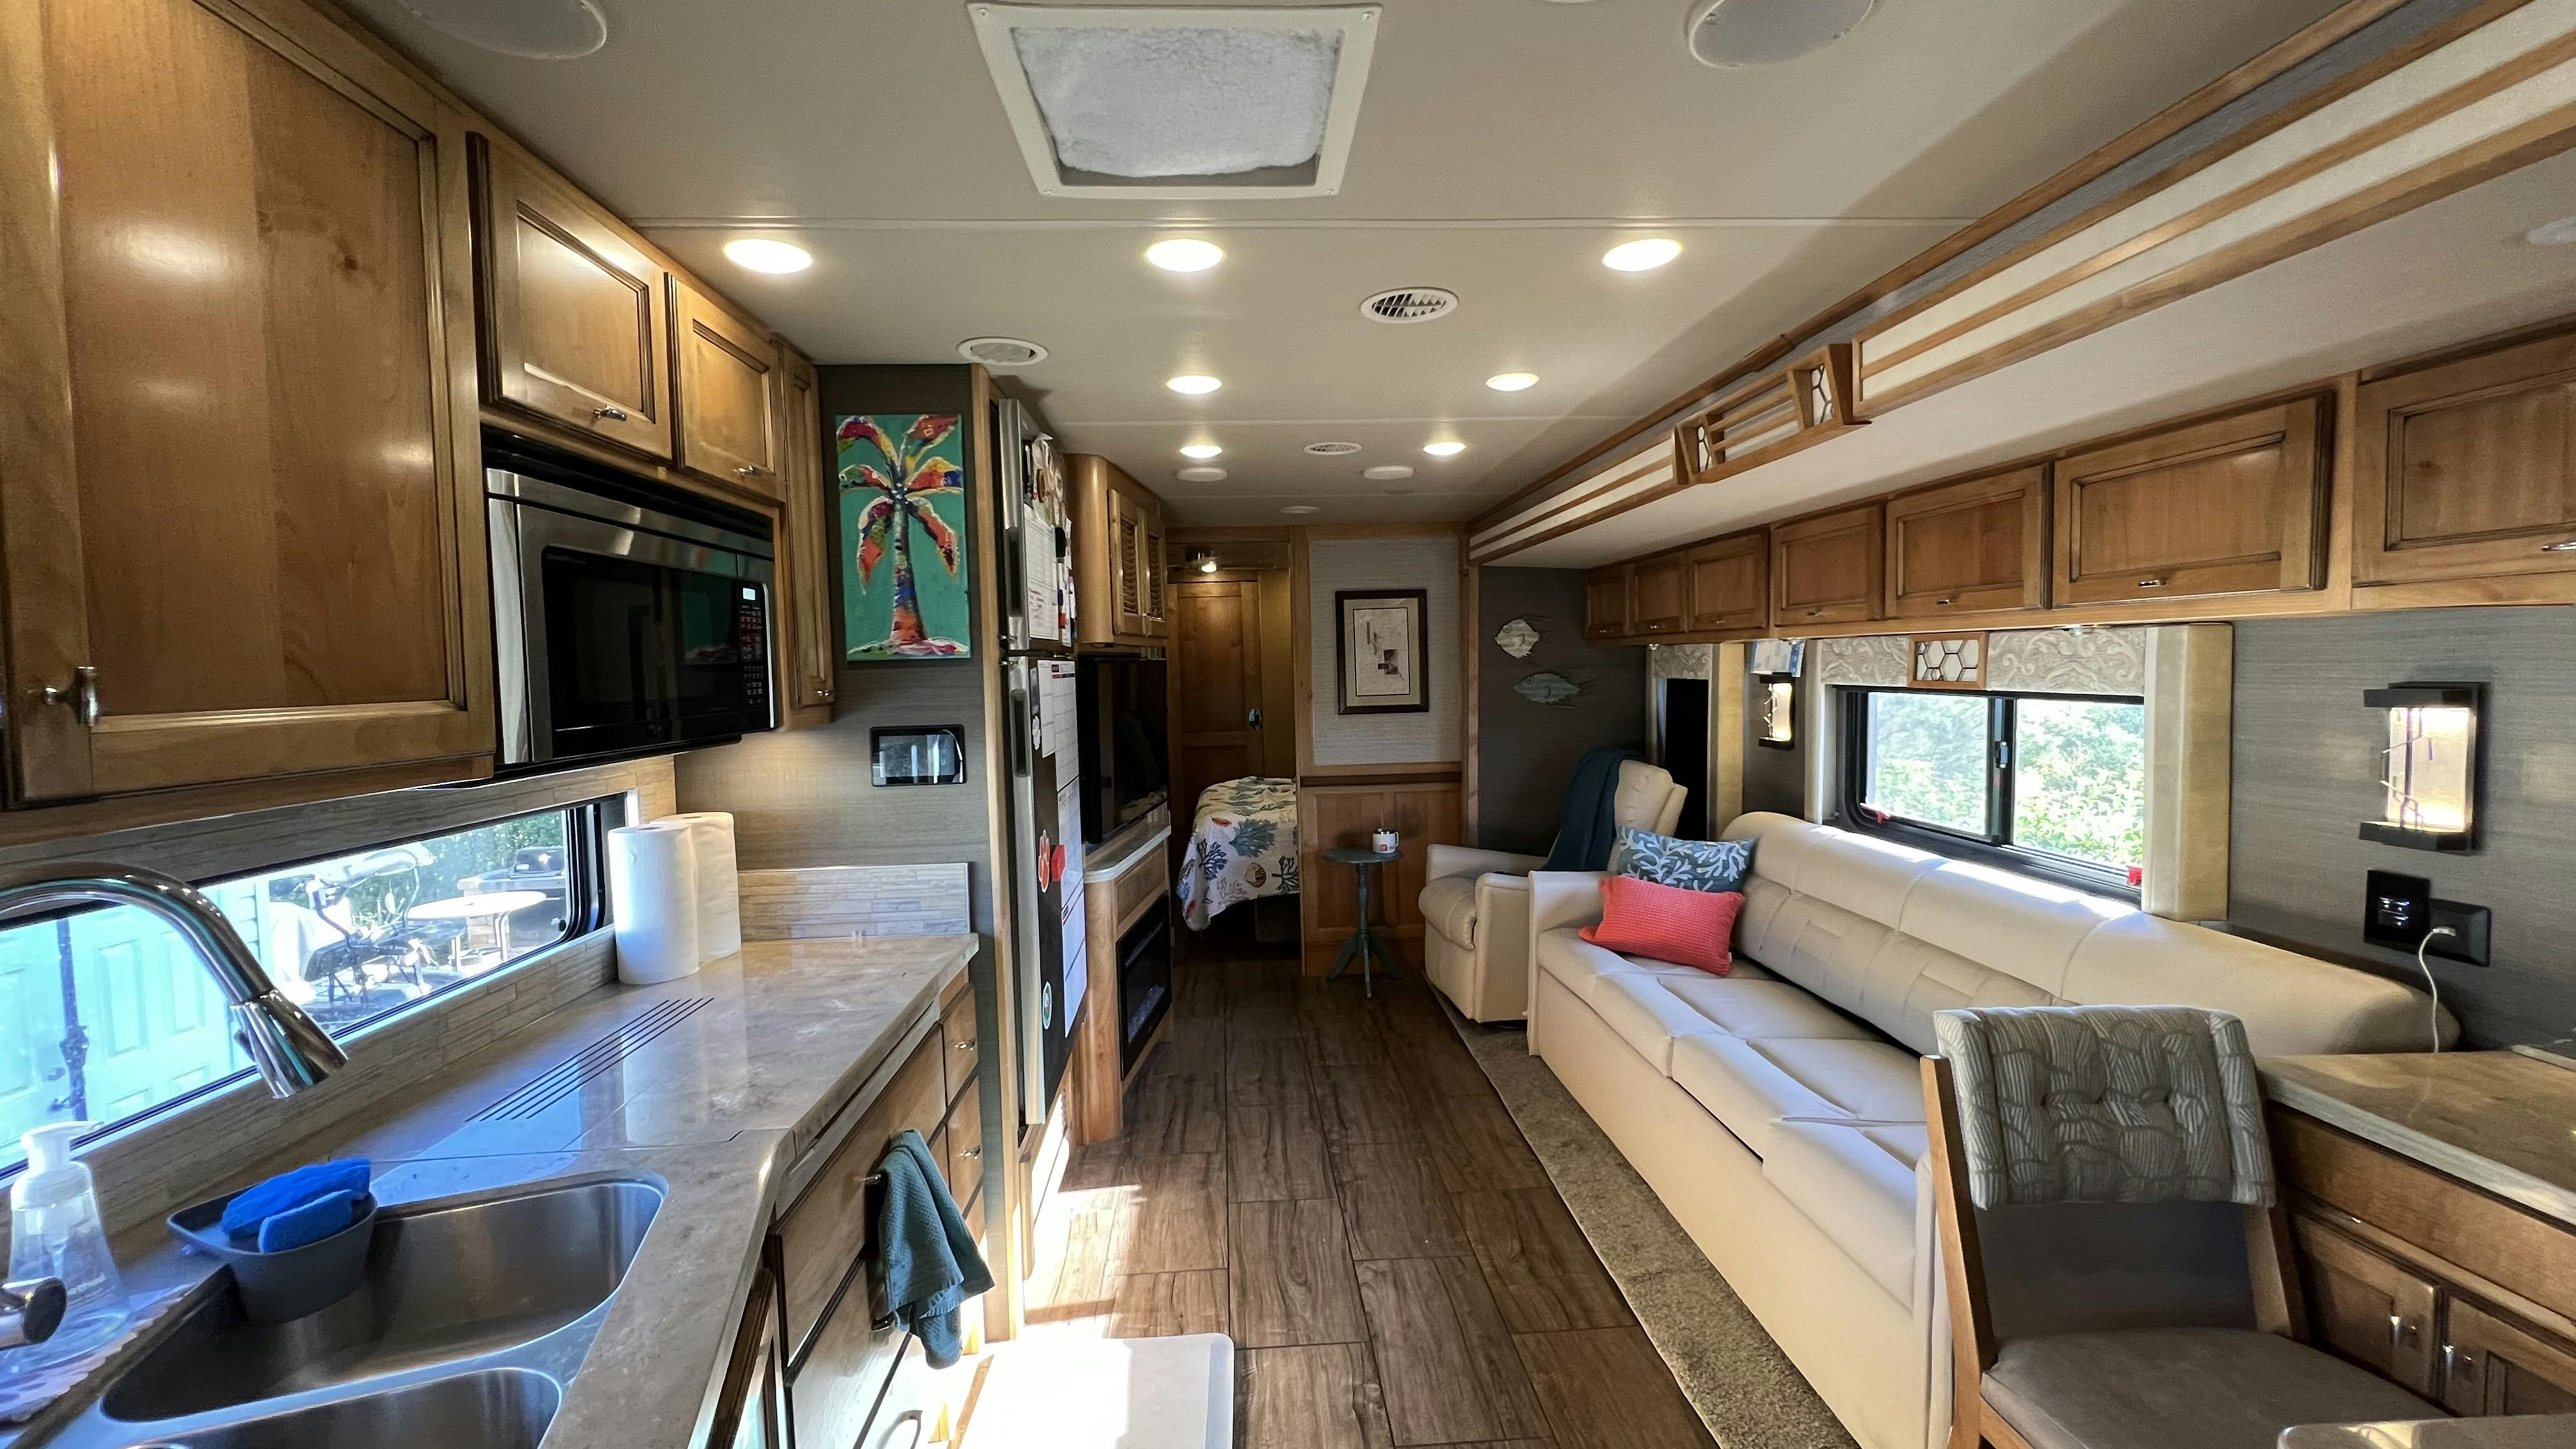 The interior of Micheal and Tiffany Dunagan's Tiffin Open Road 